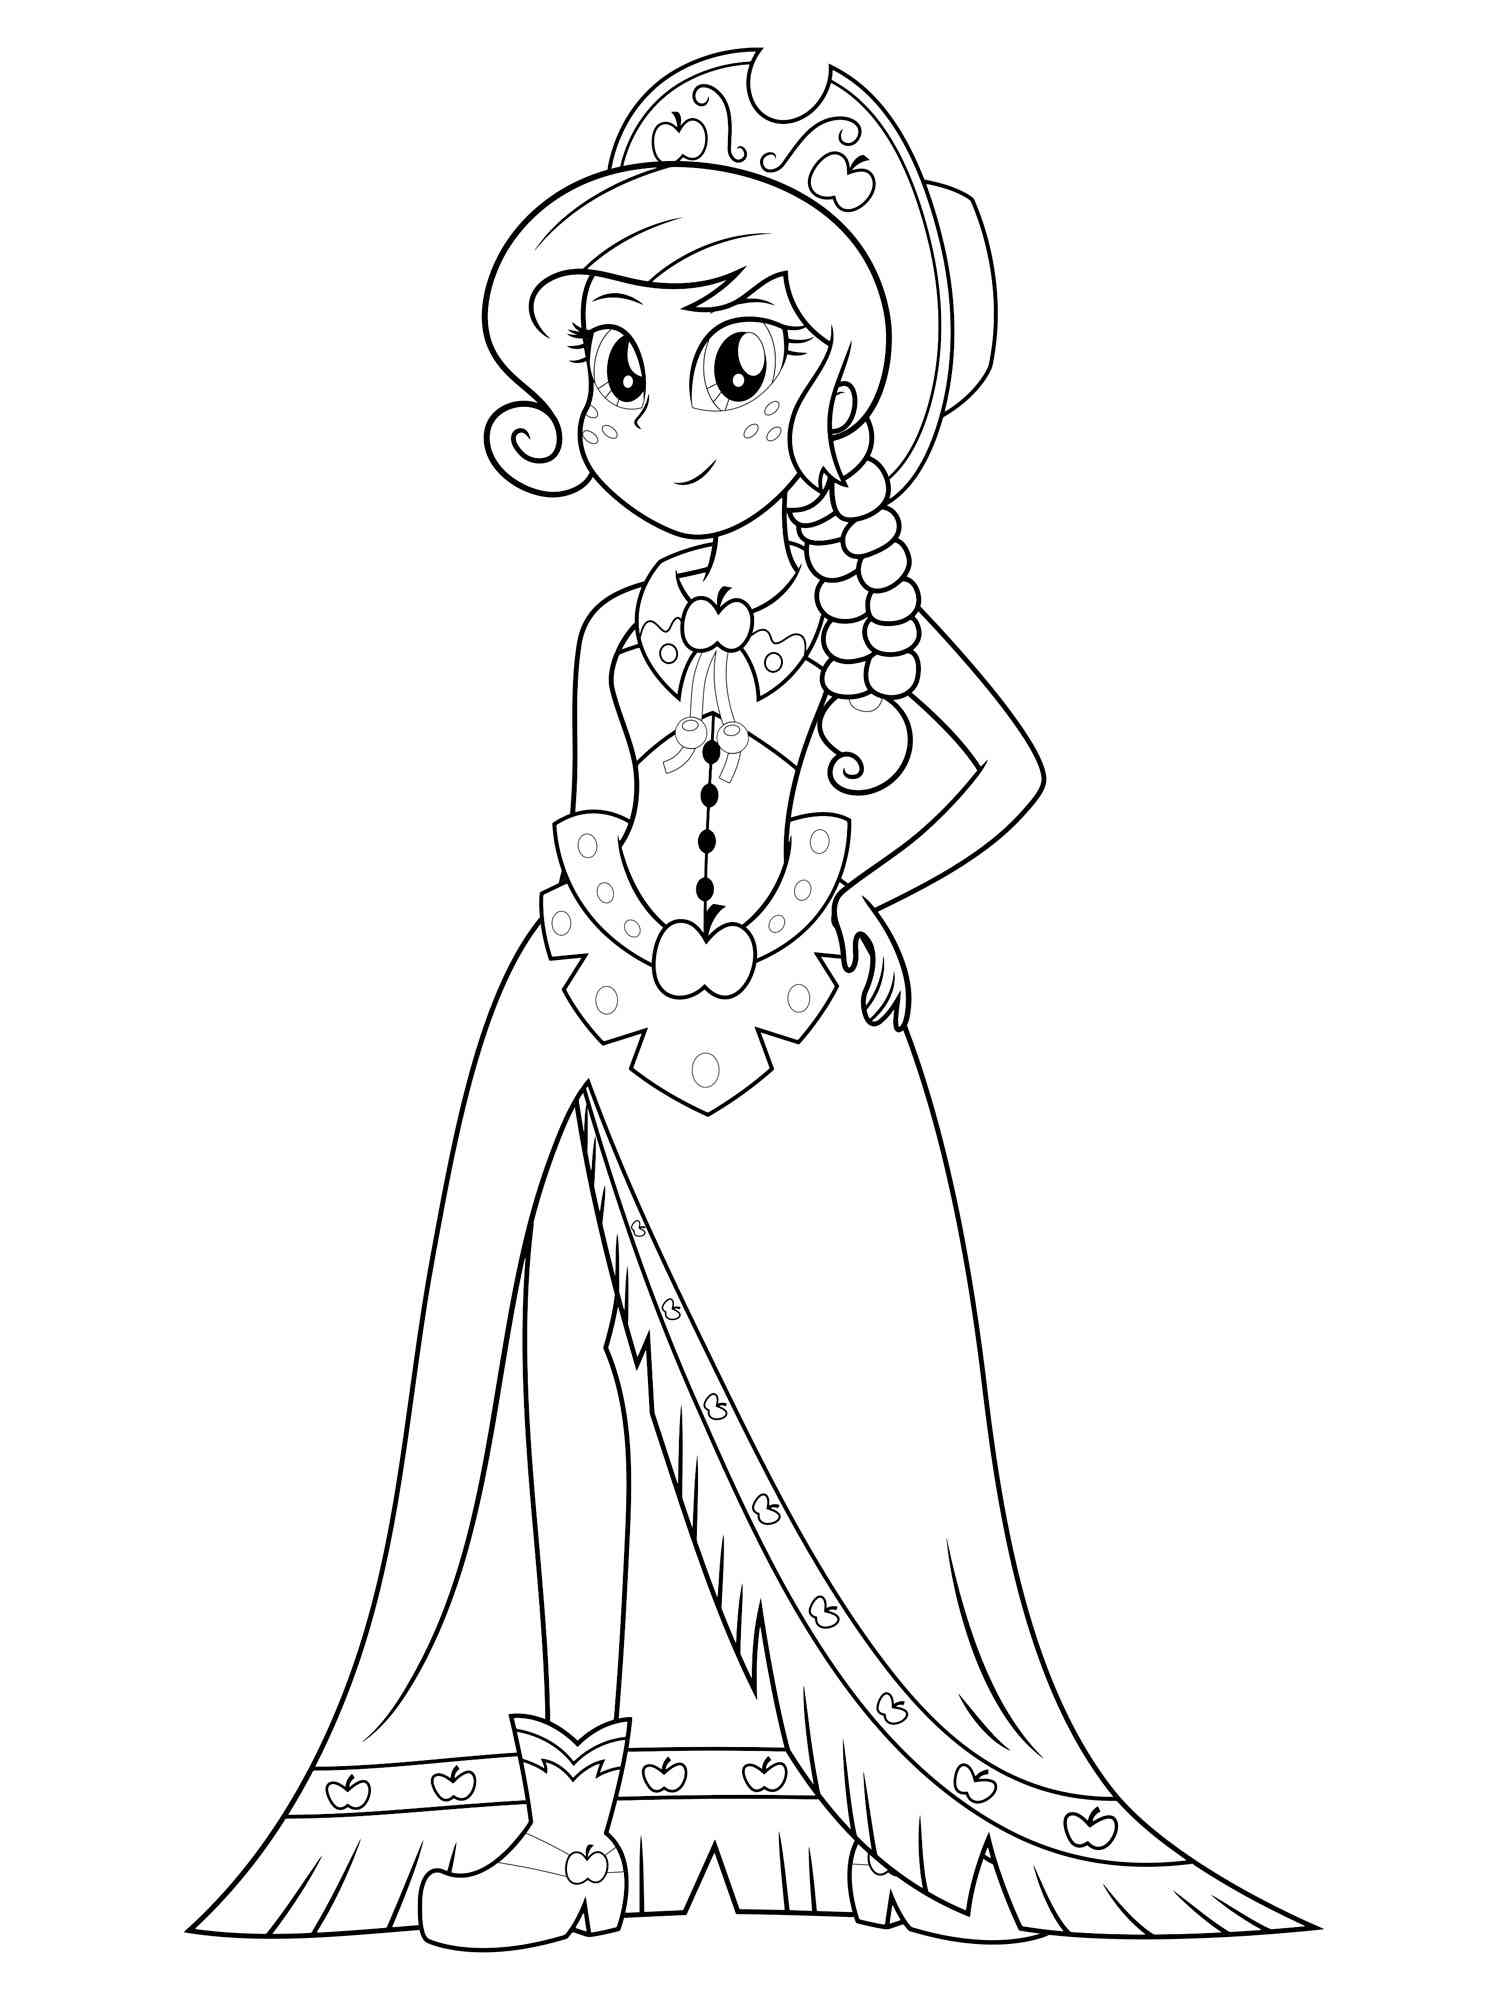 Equestria Girls 18 coloring page